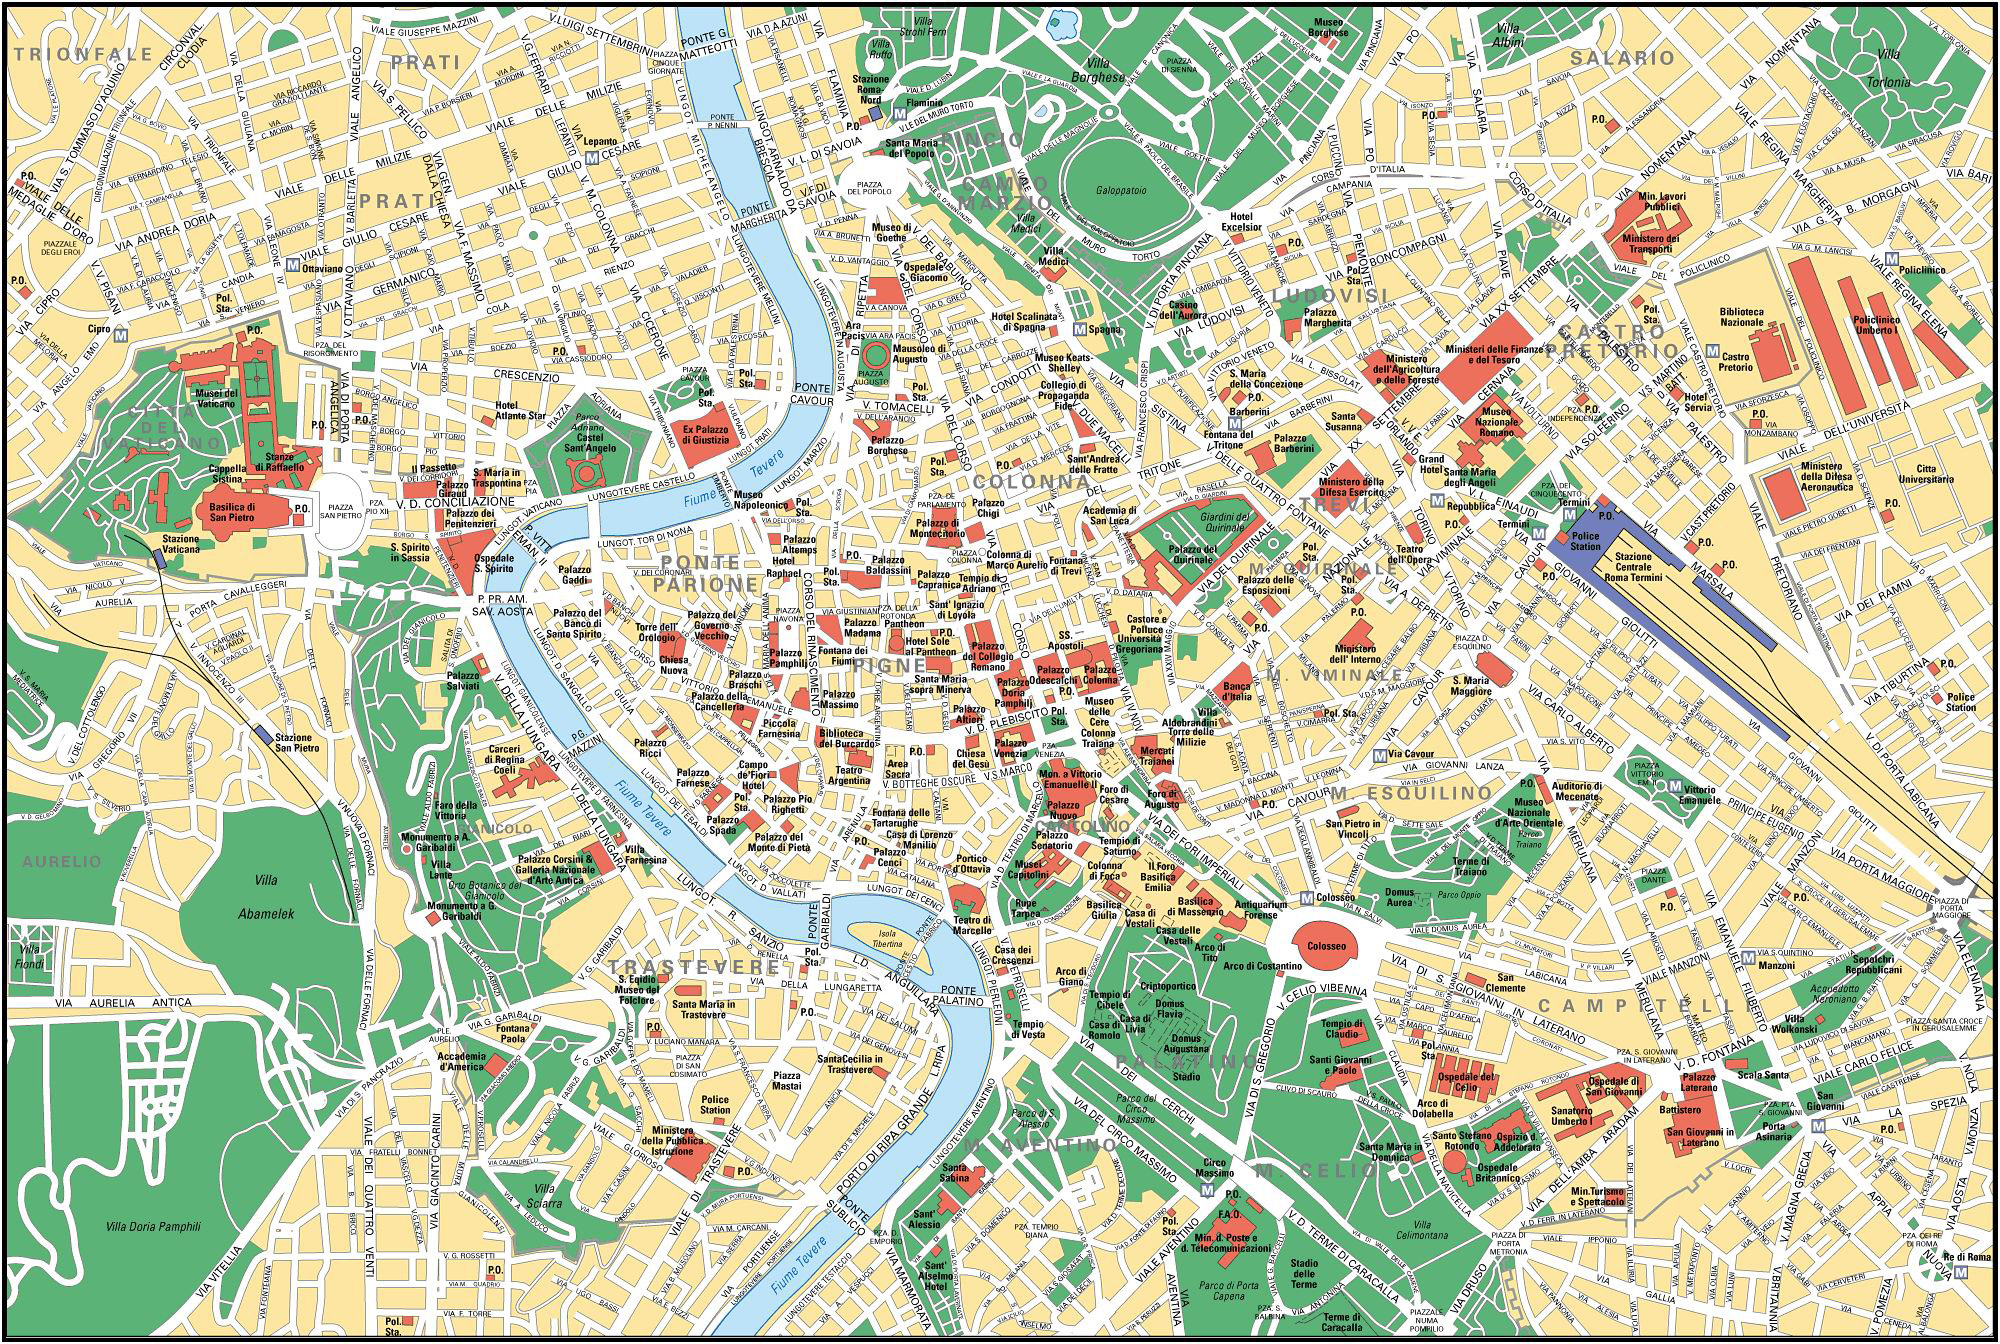 large-detailed-street-map-of-rome-city-center-rome-city-center-large-detailed-street-map